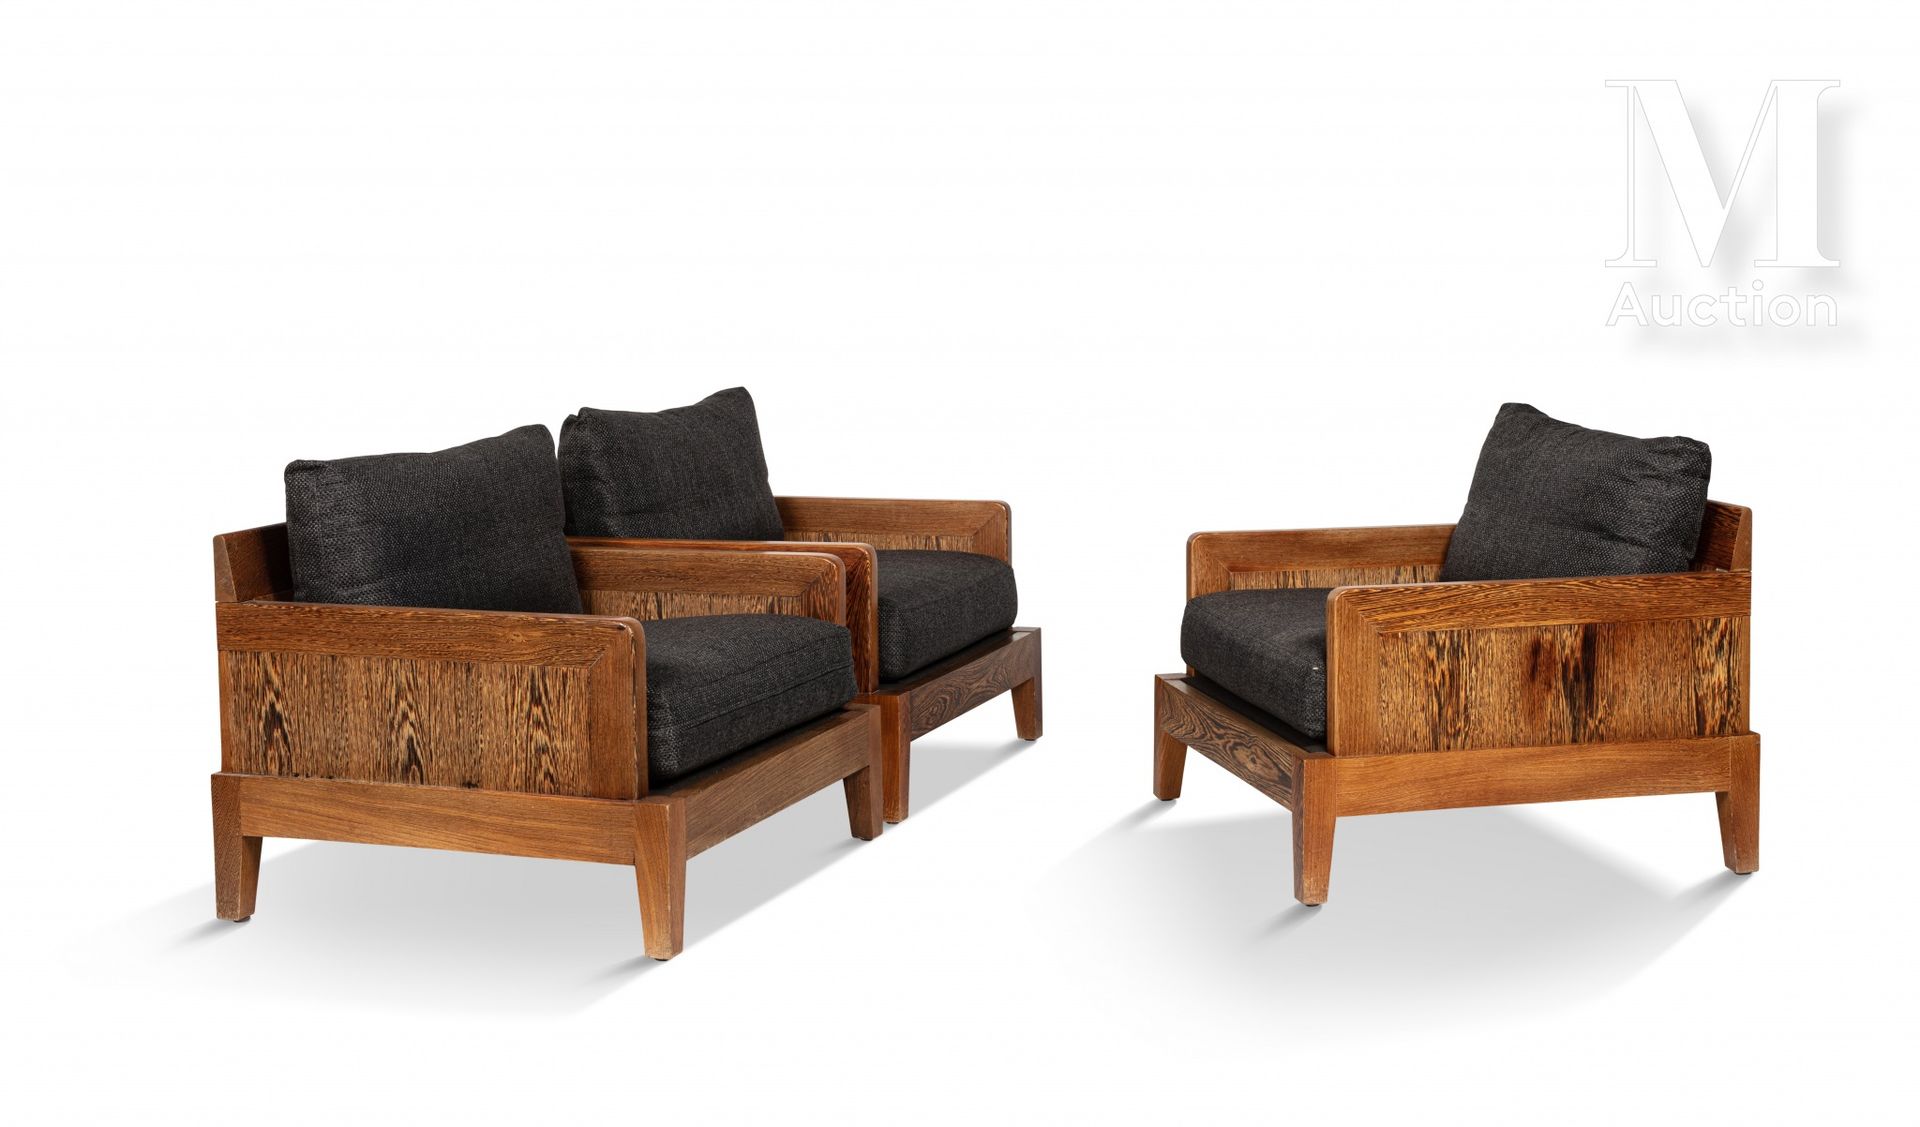 Christian LIAIGRE (né en 1945) "Opium" armchairs

Suite of three large armchairs&hellip;